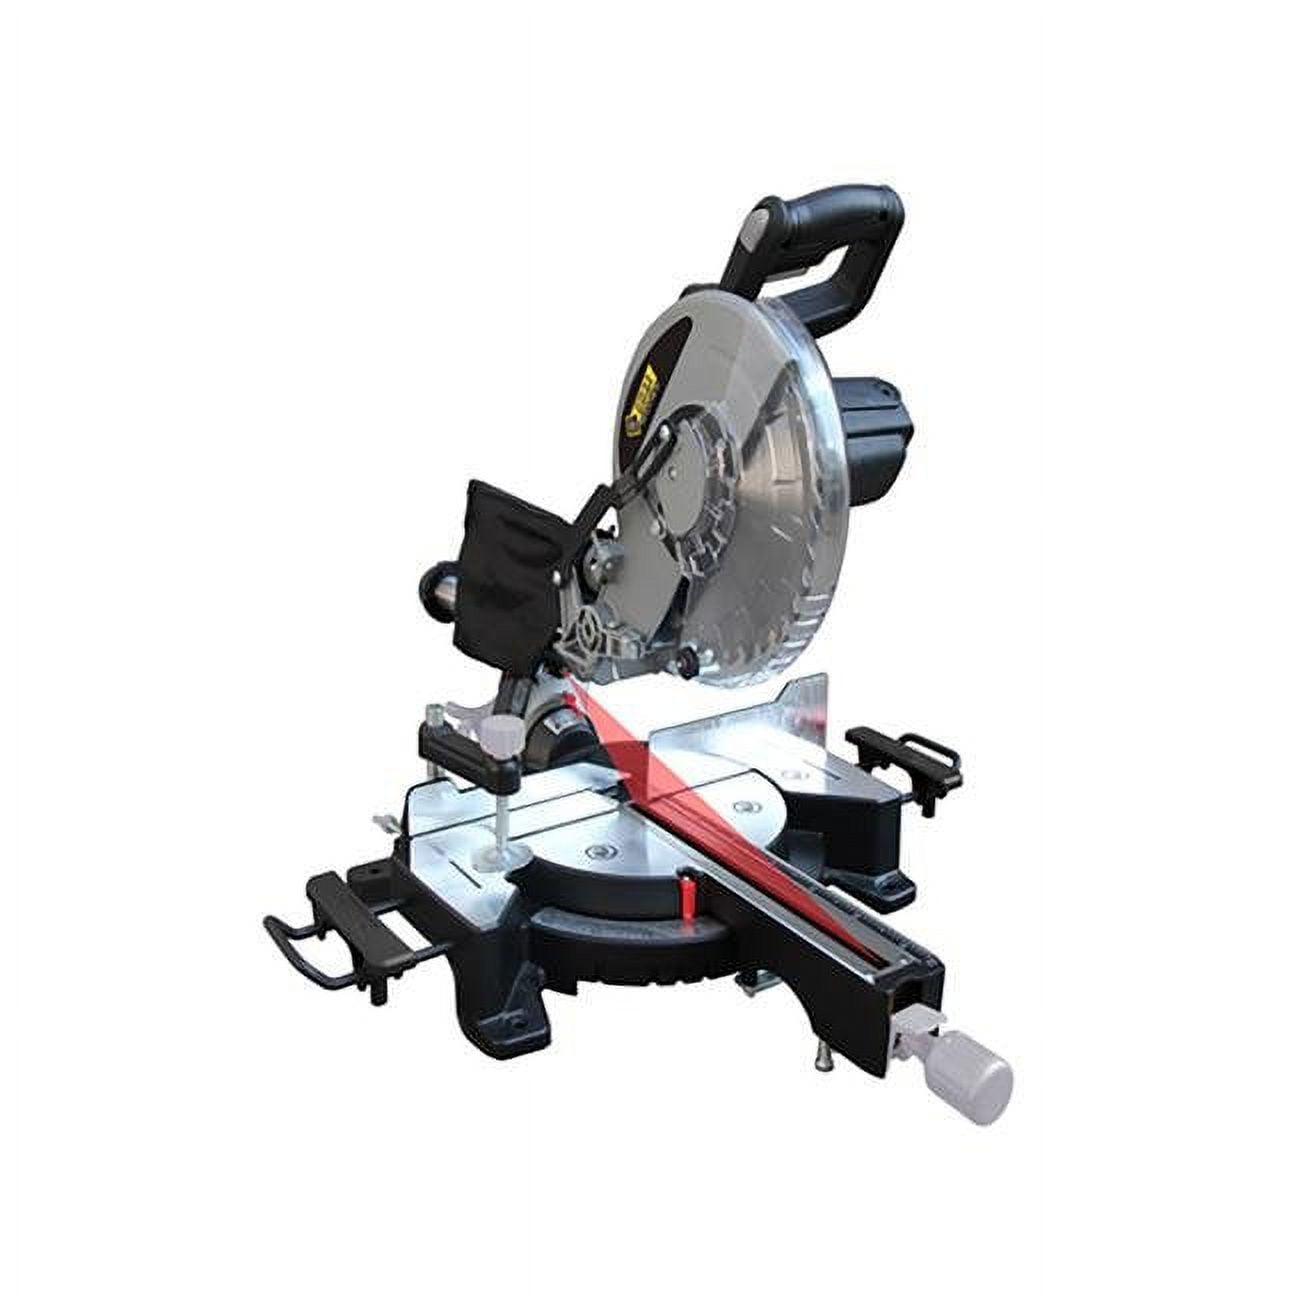 Picture of Steel Grip 2006395 10 in. 15A 5000 RPM Steel Grip Corded Compound Miter Saw Bare Tool